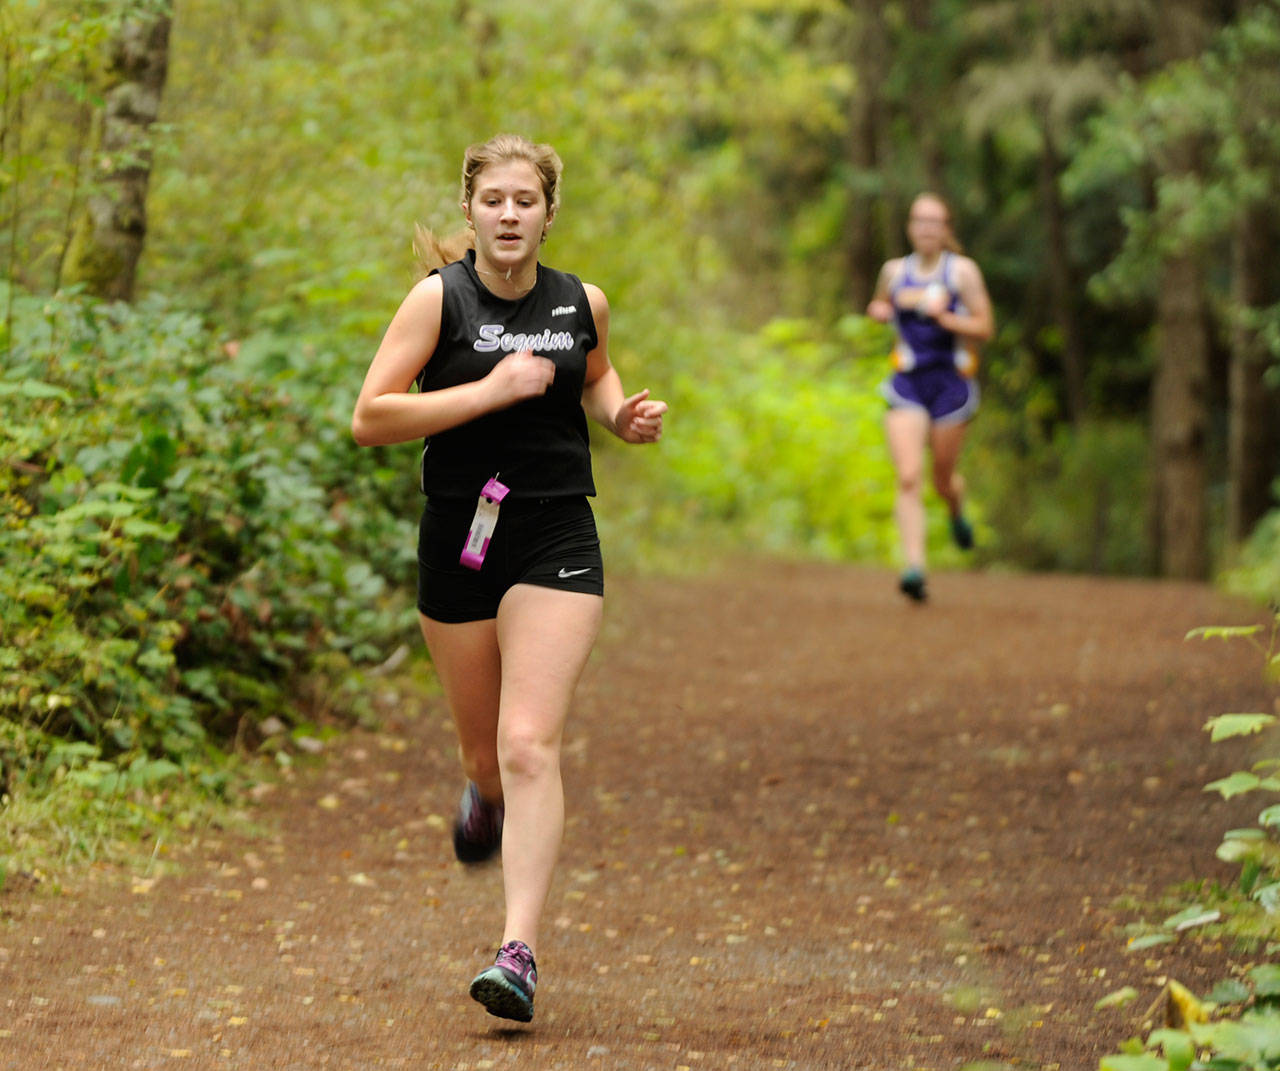 Sequim High senior Emily Silva, pictured here racing at Robin Hill County Park during an Olympic League meet in 2019, recently signed a letter of intent to compete in cross country and track at Olympic College. Sequim Gazette file photo by Michael Dashiell